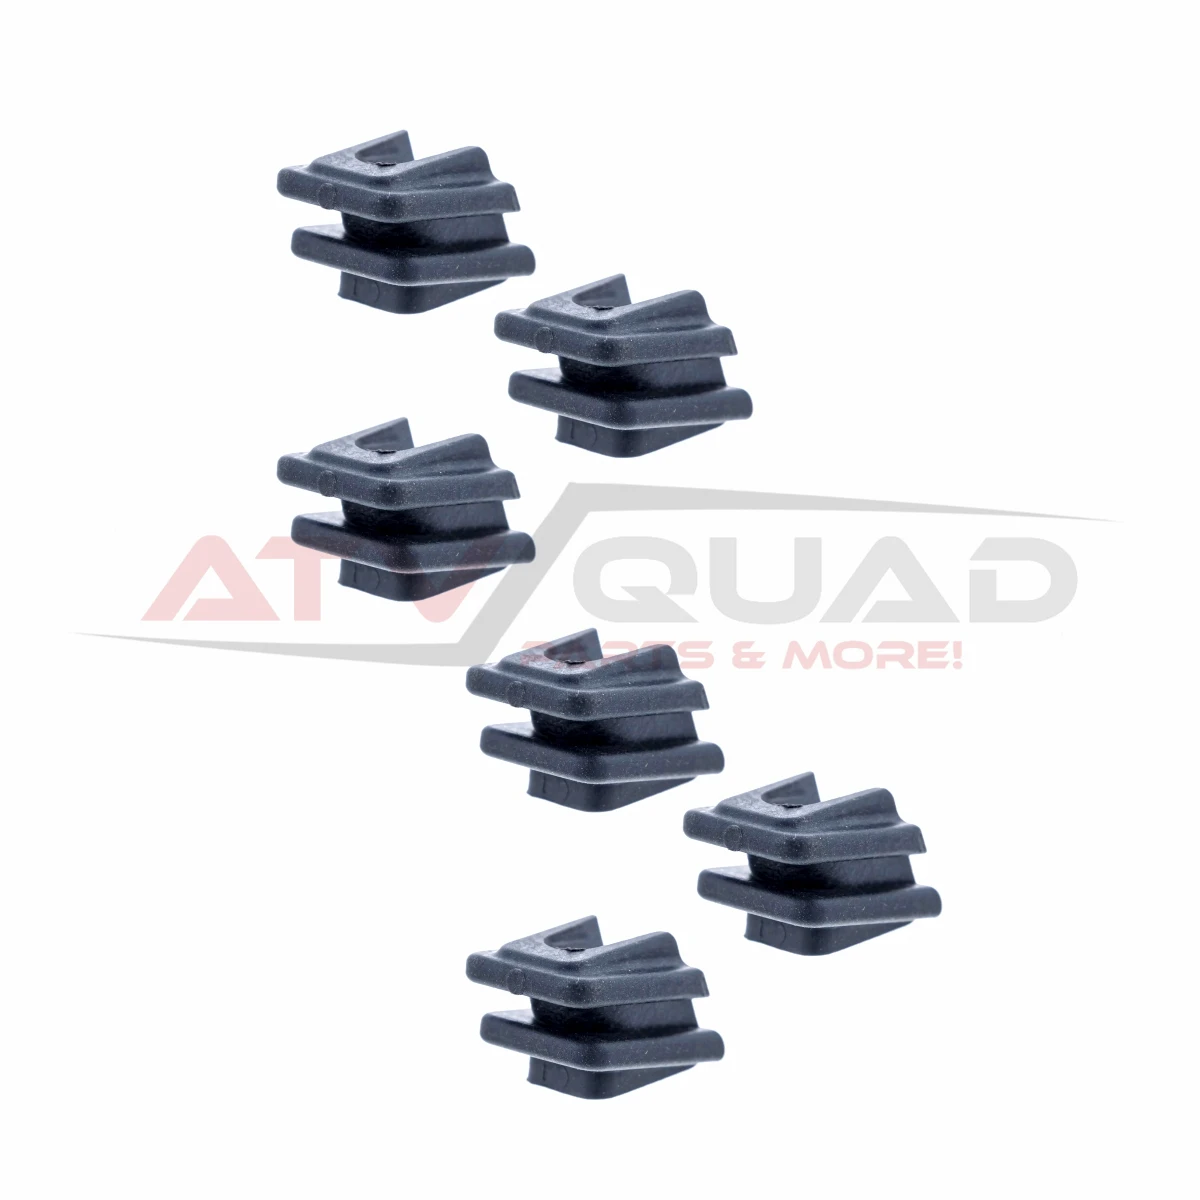 Drive Pulley Outer Plate Nylon Slider for CFmoto 400 450 500S 520 500HO X5HO 550 X550 U550 Z550 600 625 Gladiator 0GR0-051006 20 100pcs 5 nylon coil zipper puller slider christmas for handbag bags clothes decorative zip head replacement diy accessories